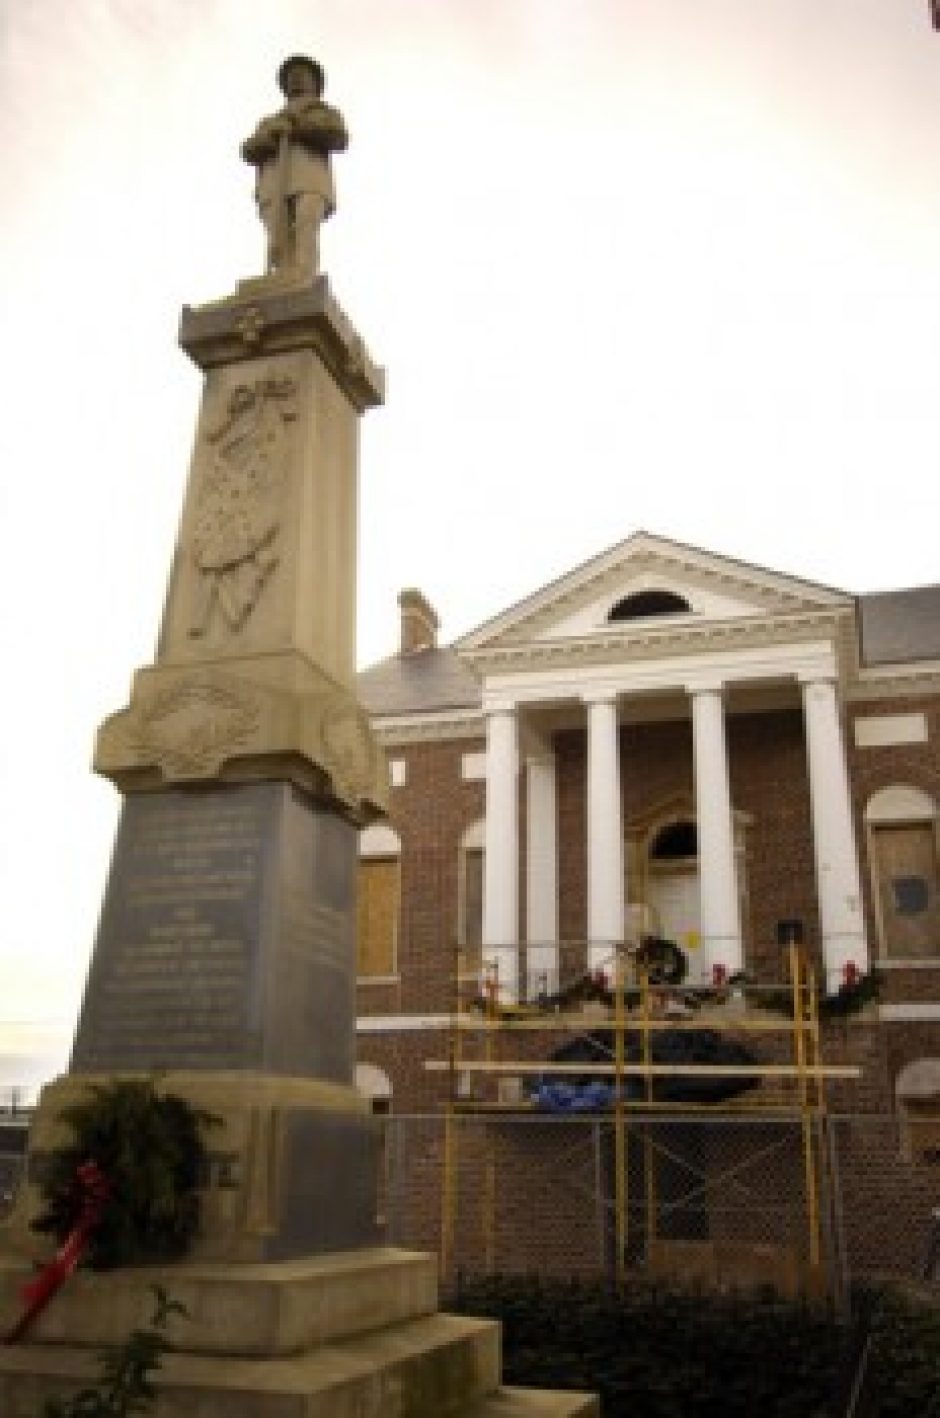 The historic Lancaster County Courthouse, rebuilt after suffering damage in a fire.